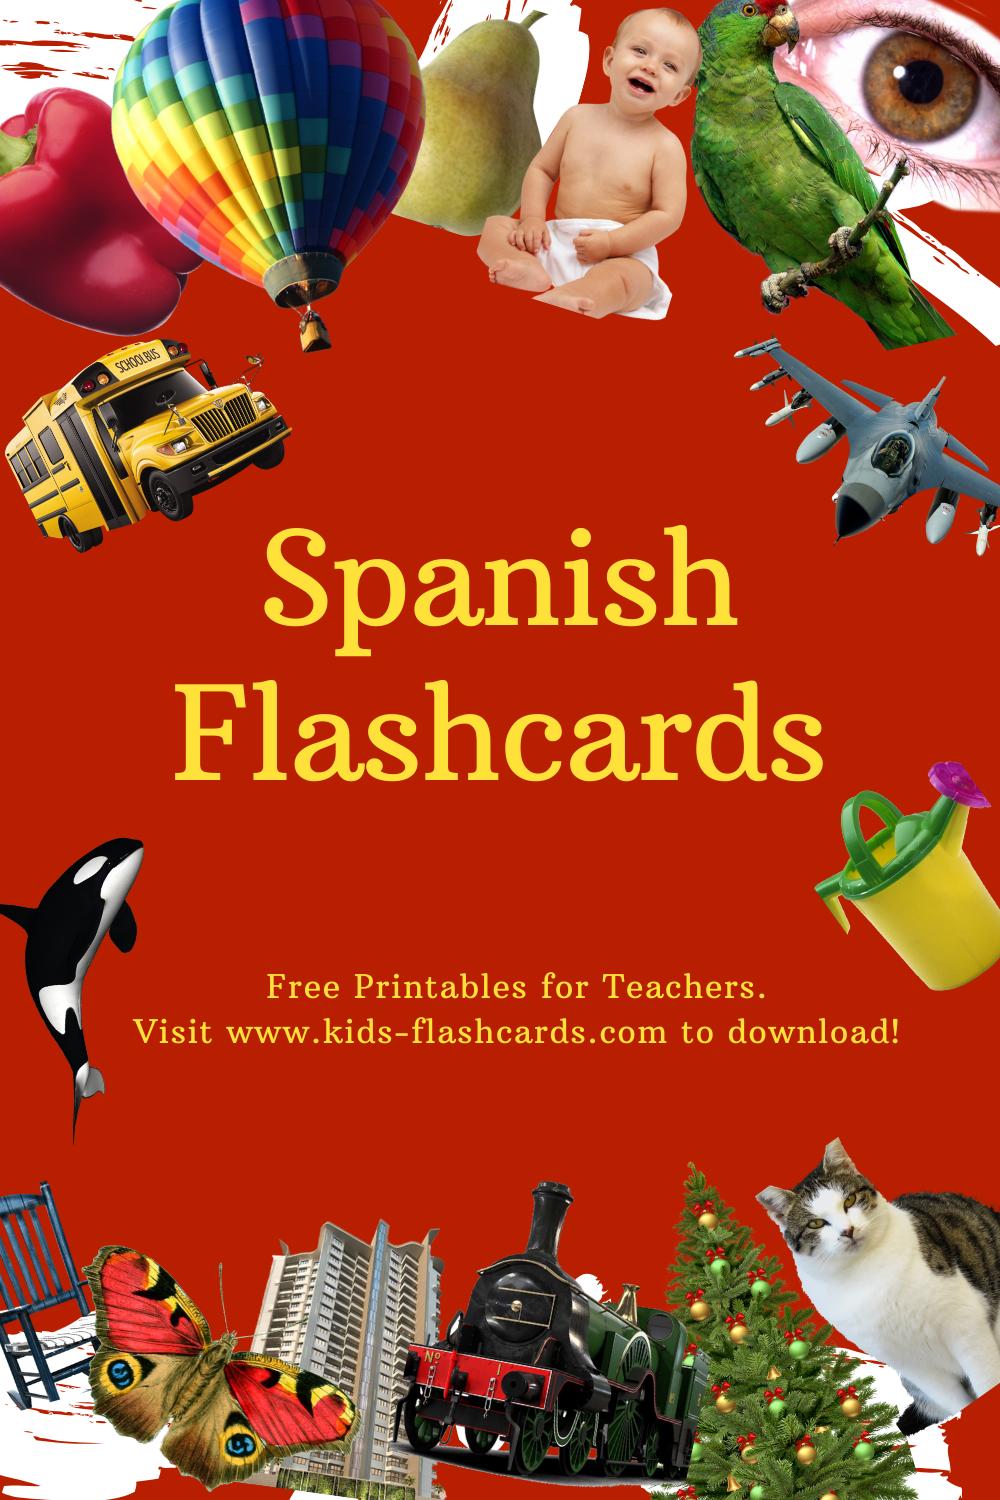 Worksheets to learn Spanish language